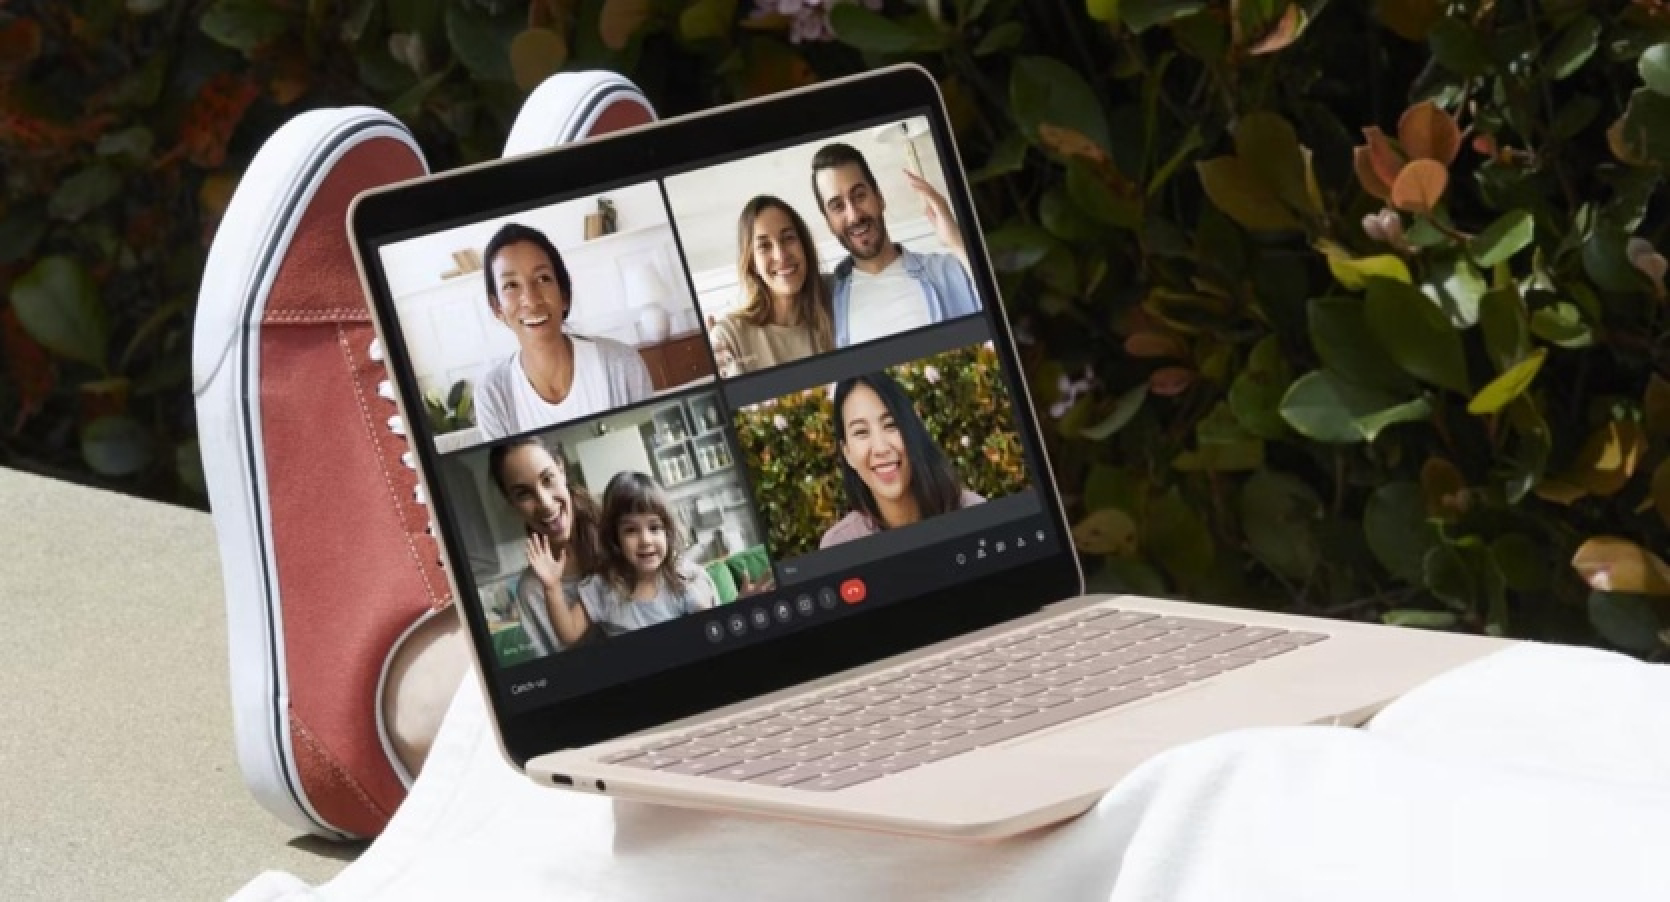 Google Meet now allows you to transfer video calls between different devices: PC, iOS and Android